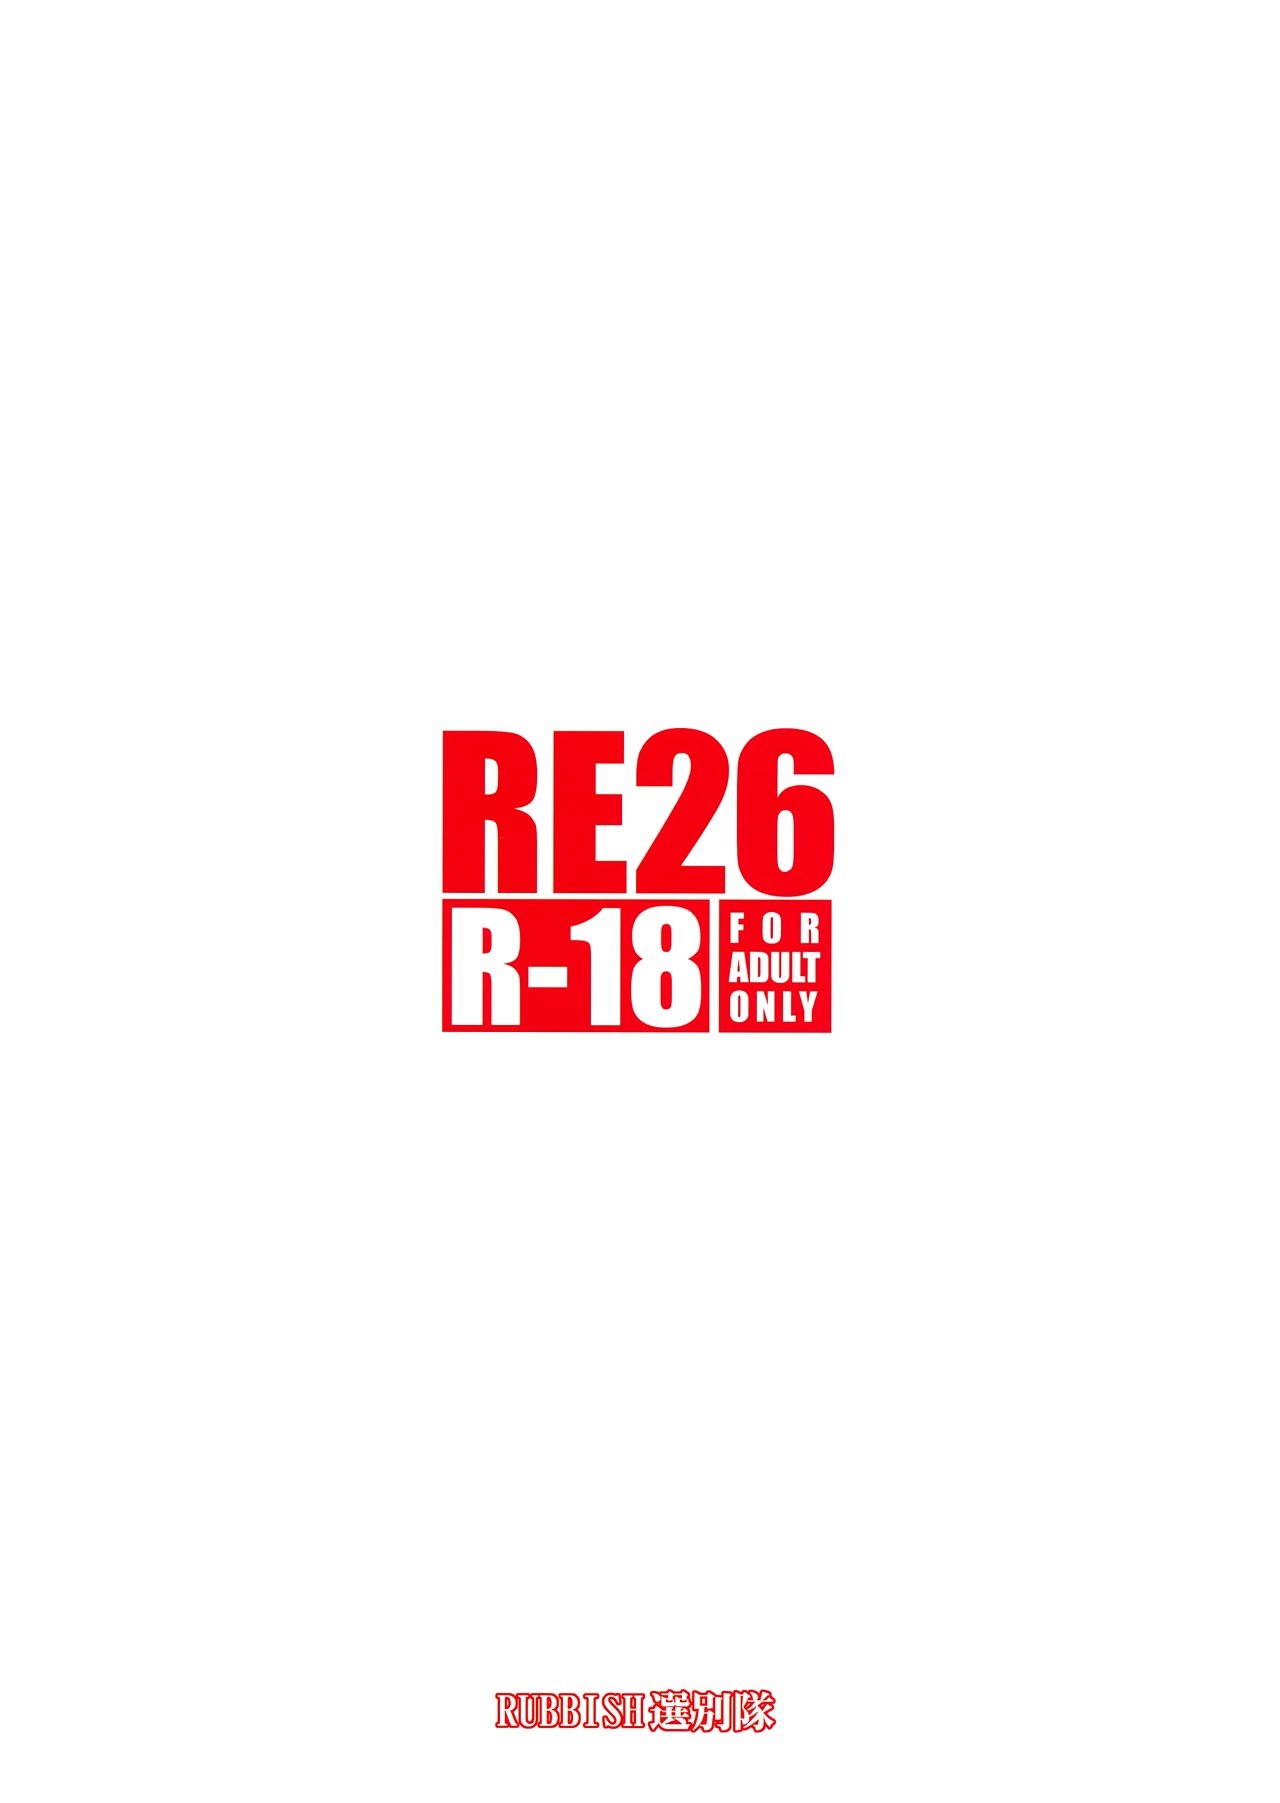 RE26- - 33